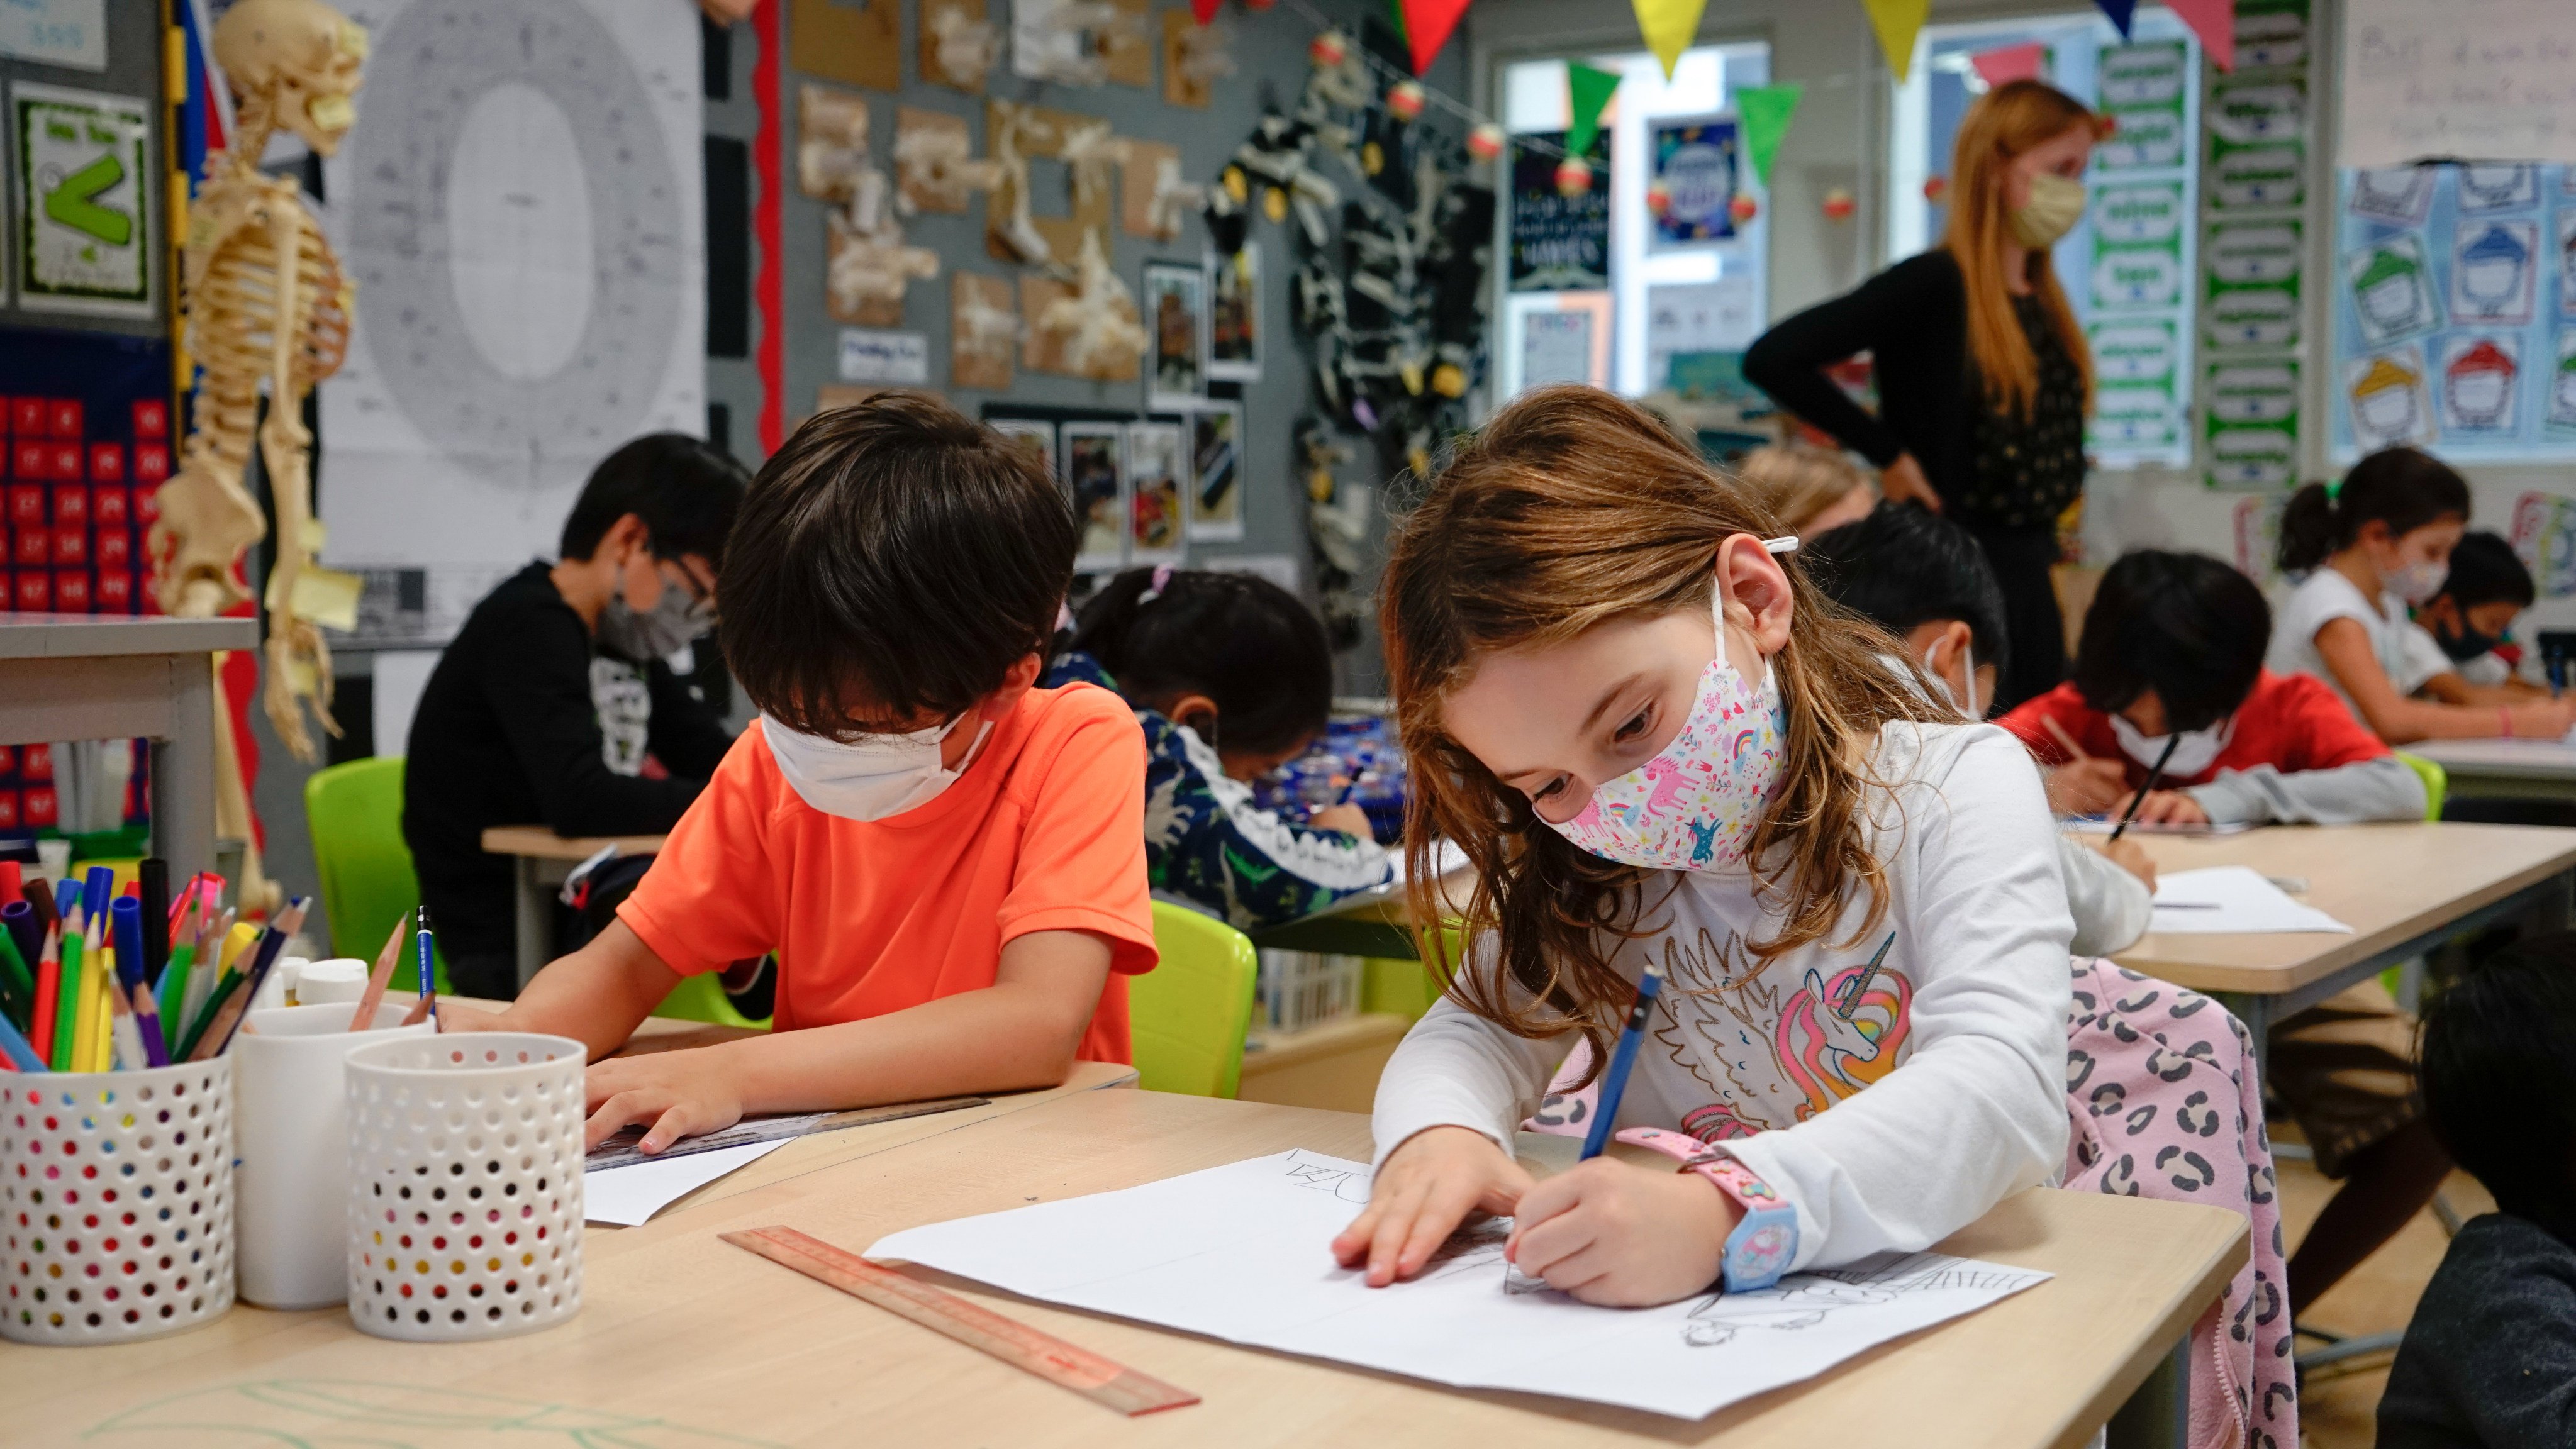 Traditional subjects like mathematics and science are emphasised at German Swiss International School. Photo: Handout